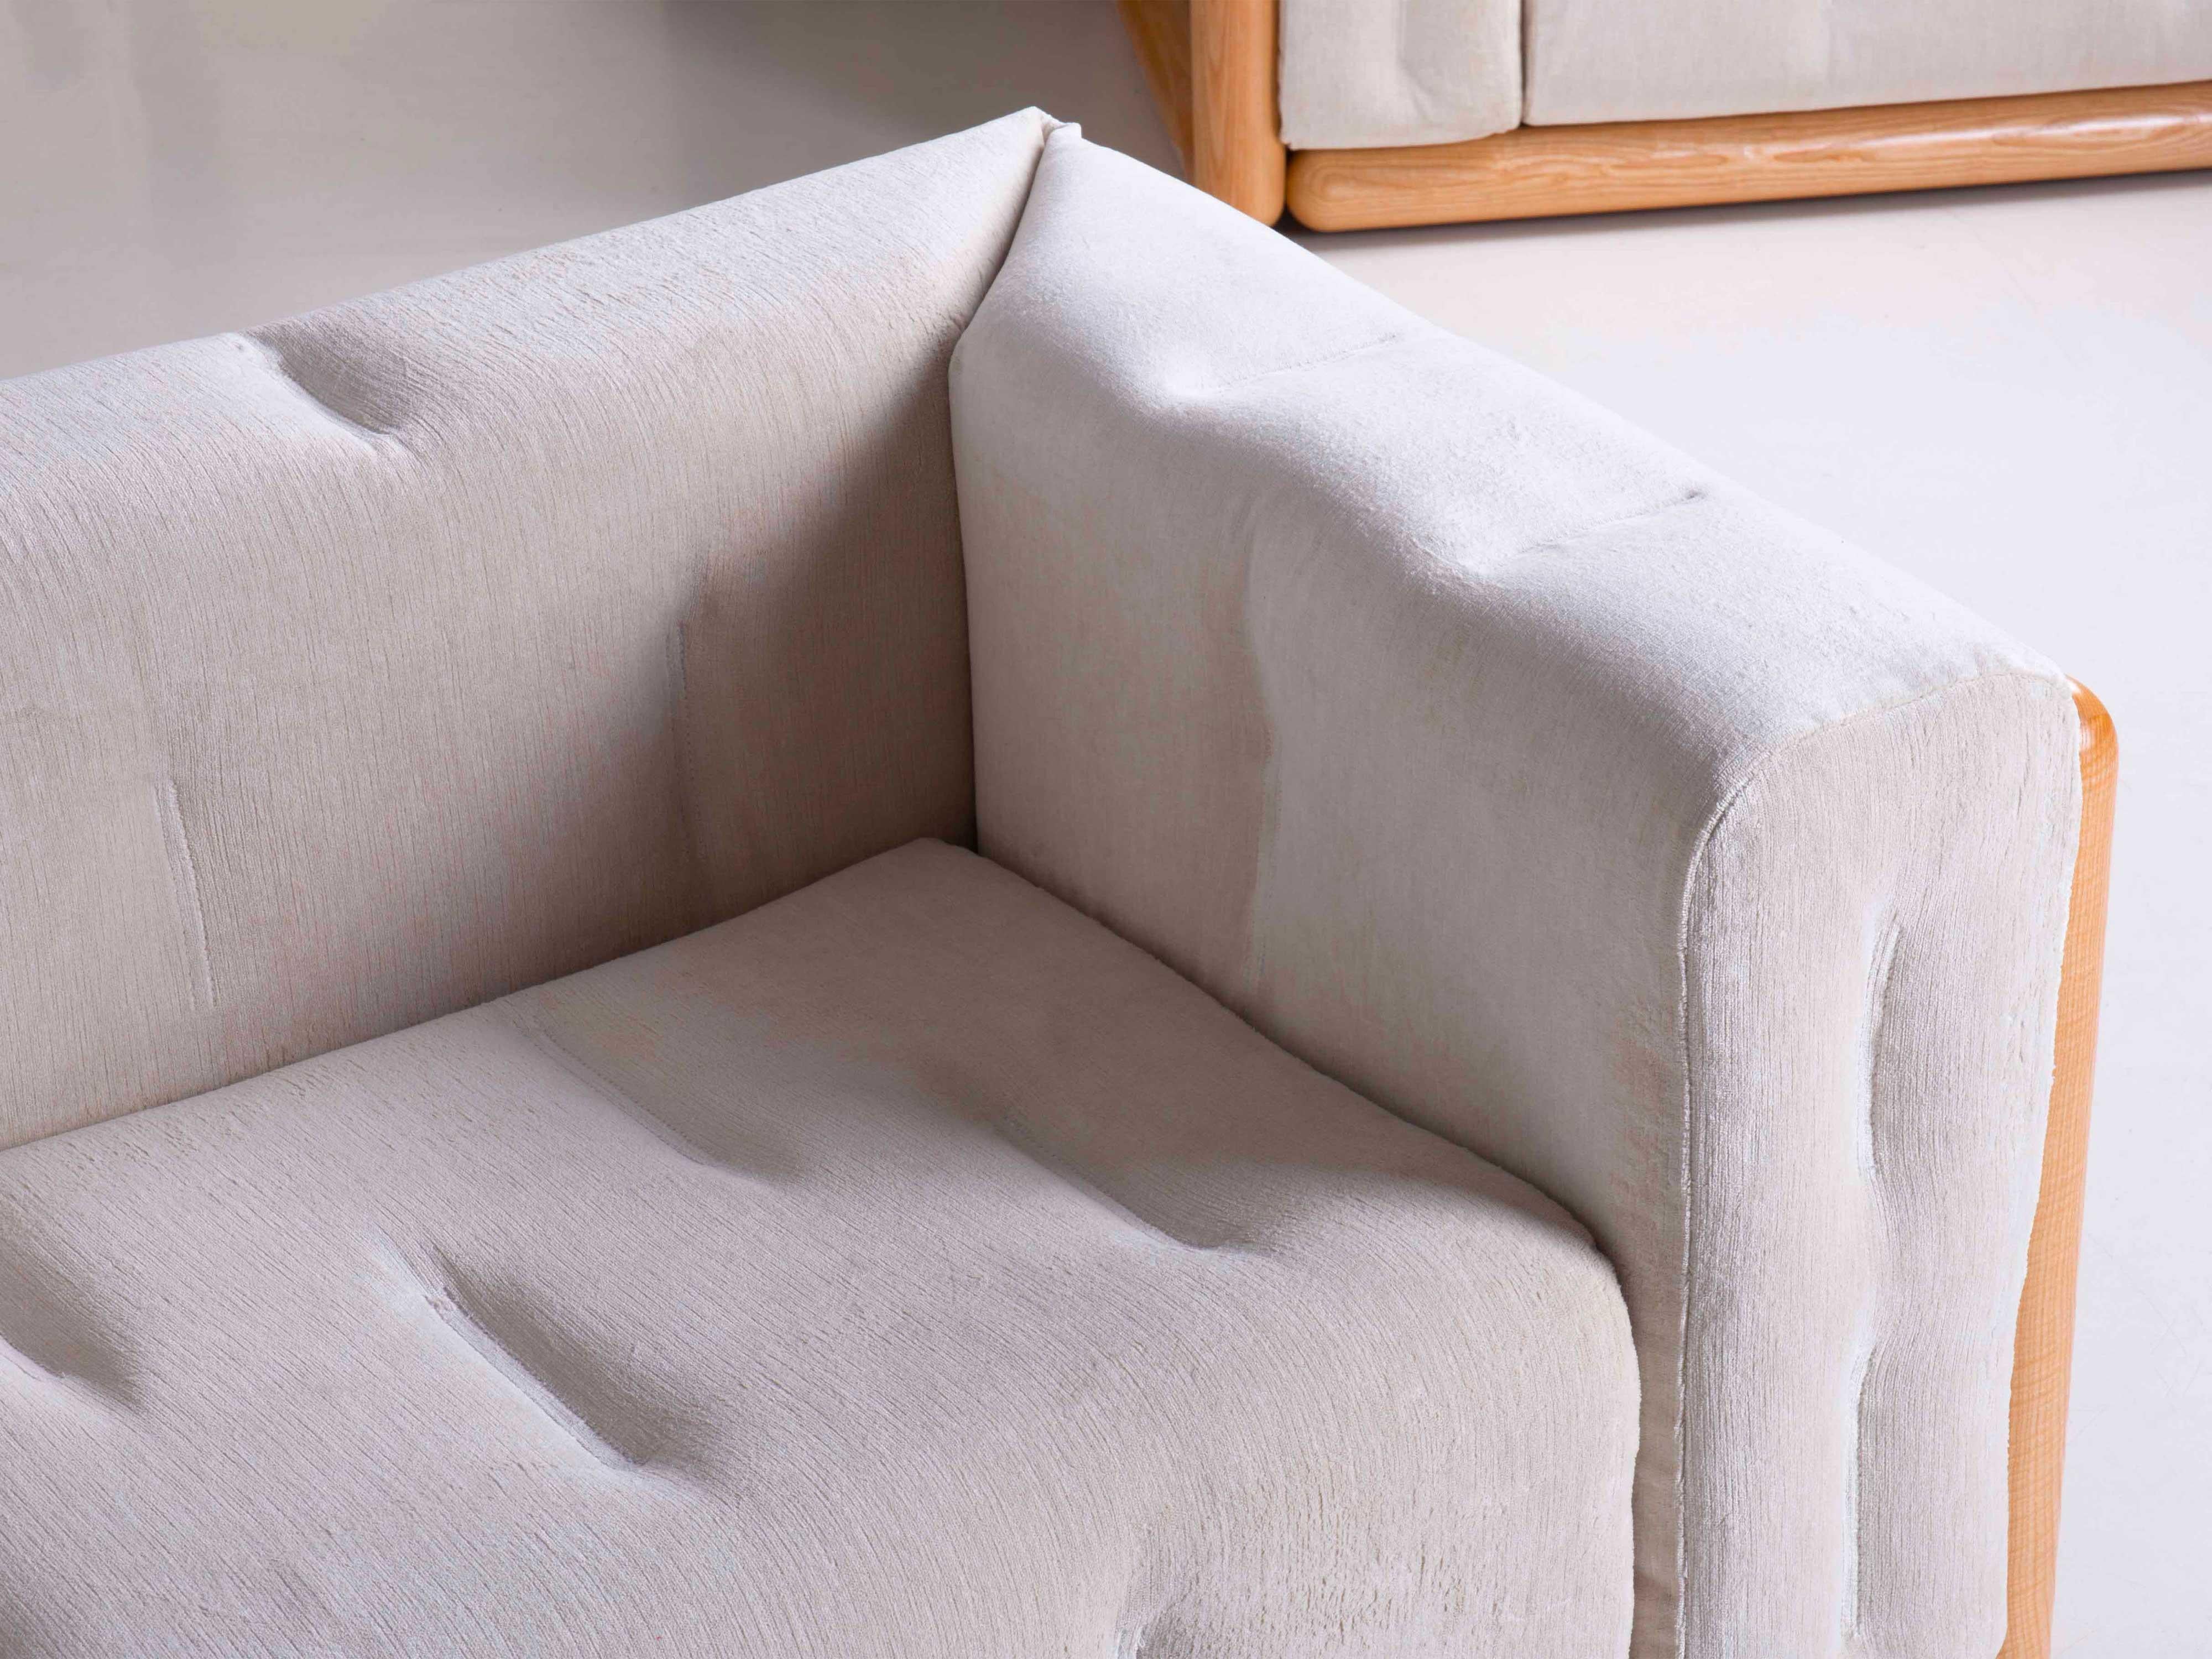 Cornaro 140 armchair designed by Carlo Scarpa. Two pieces available.

Ash wood structure, recently upholstered with linen velvet. Polyurethane padding. The one-unit side and back cushion is fastened to the frame corners.

At the beginning of the